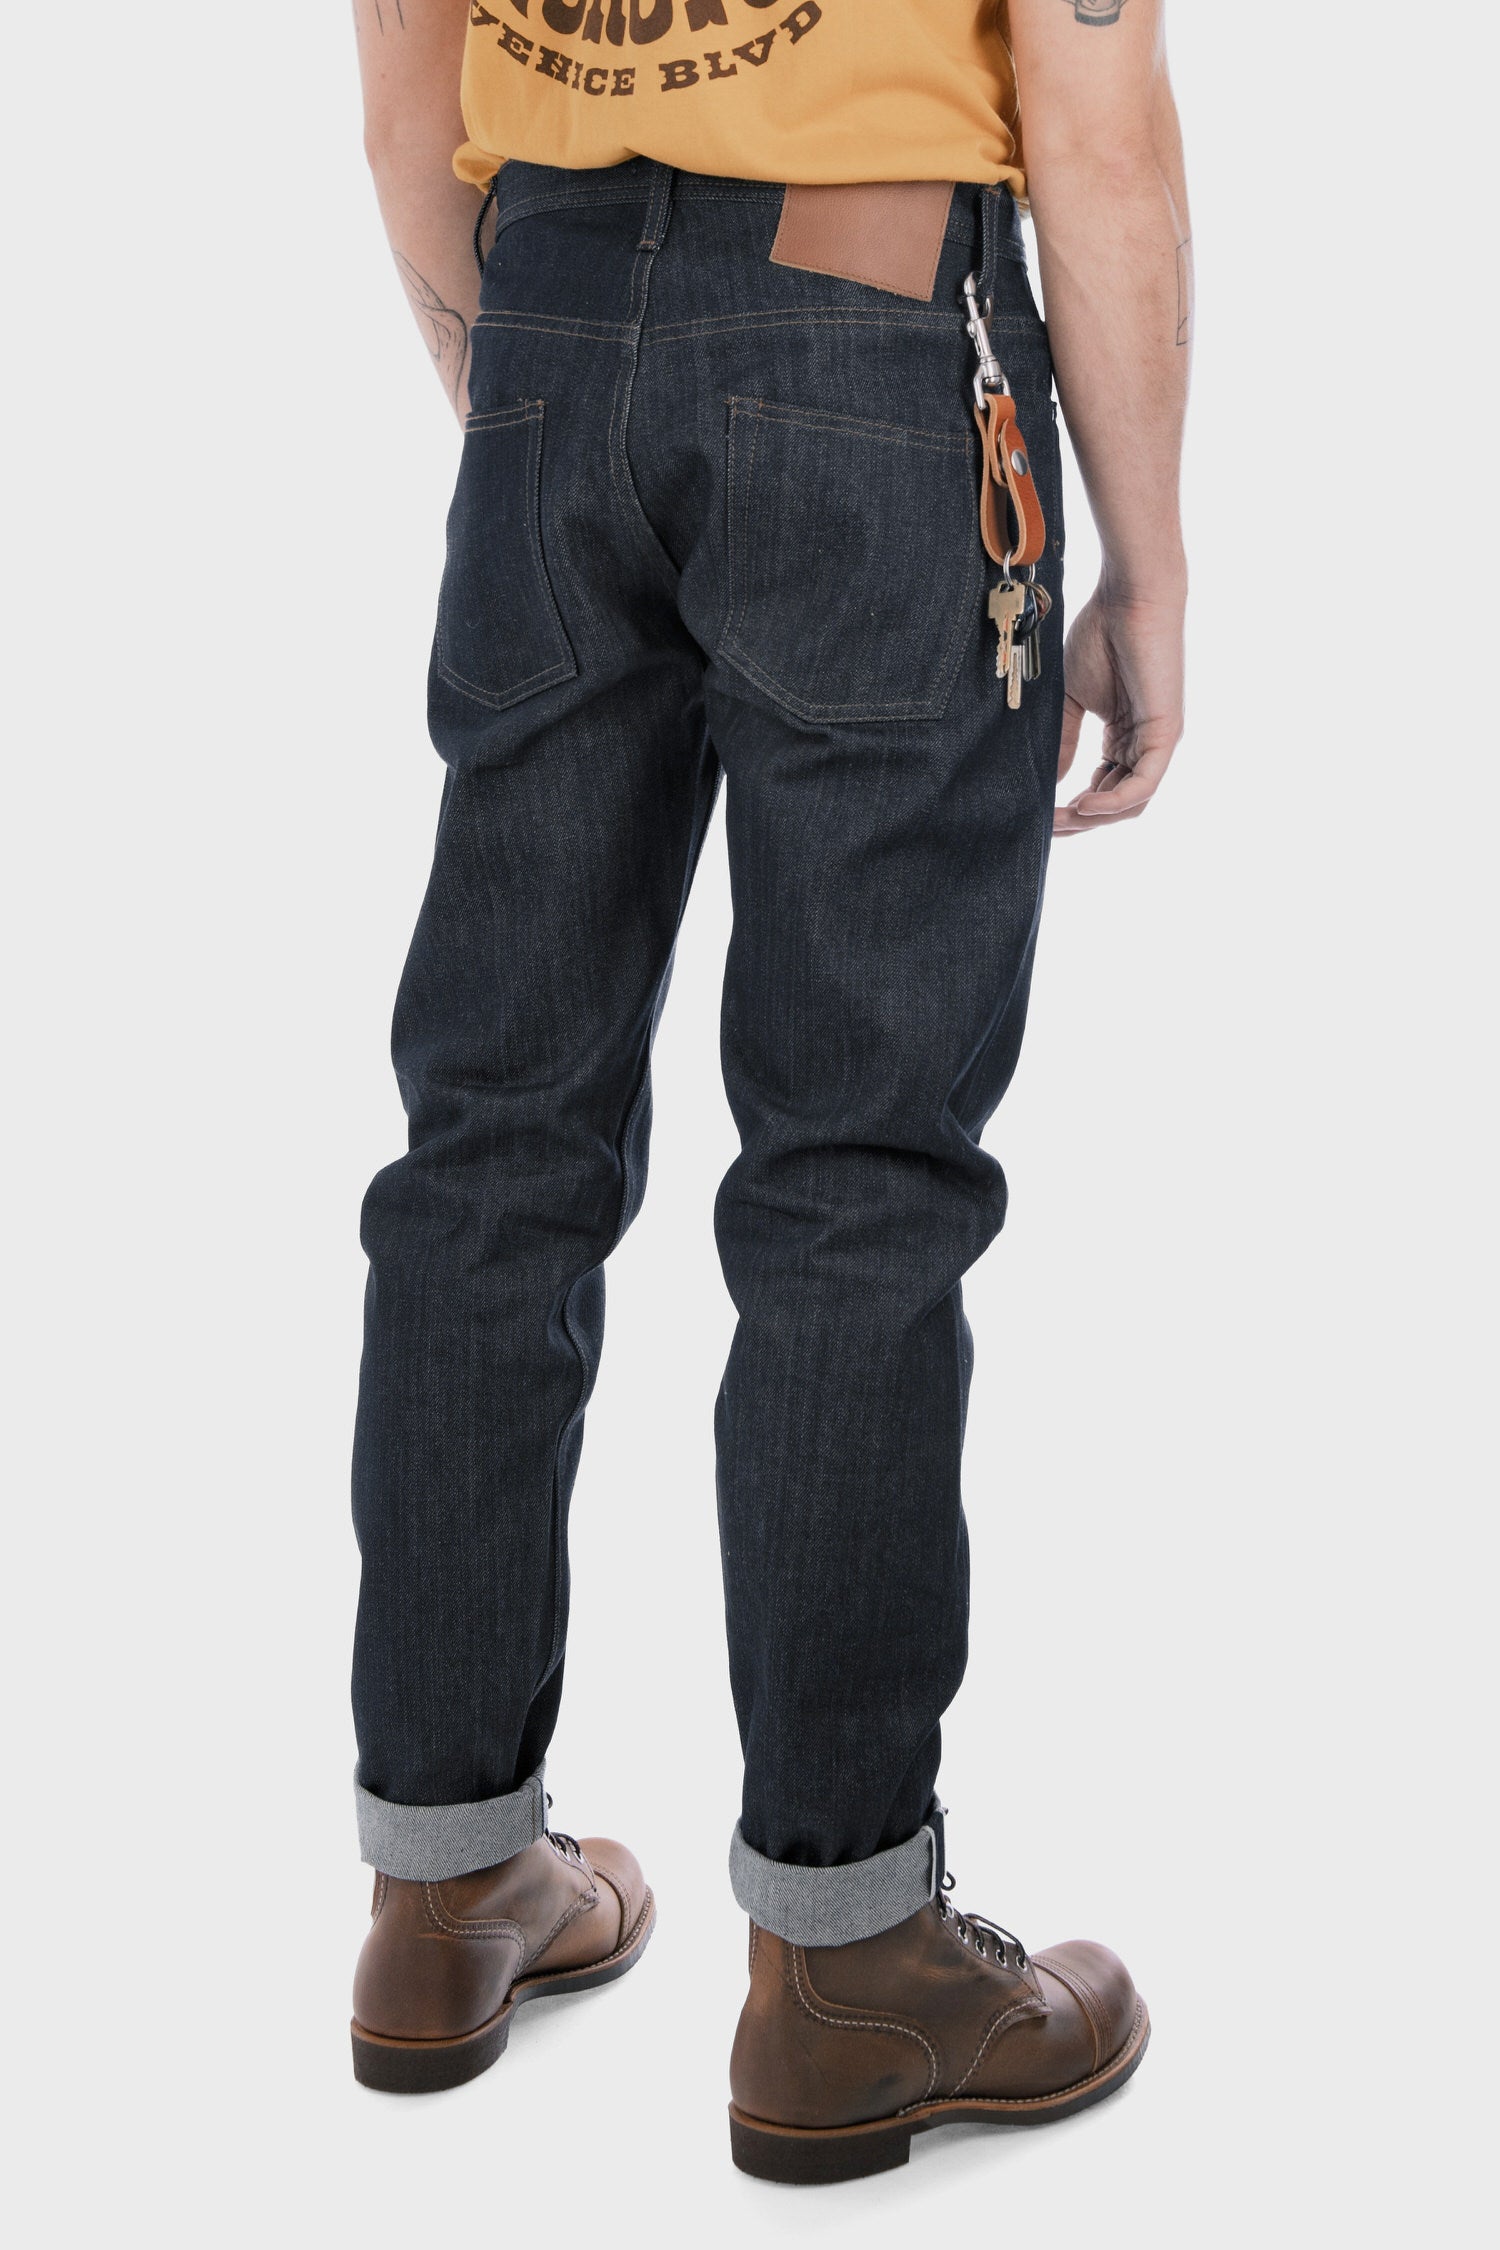 Men's Unbranded Brand Relaxed Tapered Fit in Indigo Selvedge — Philistine